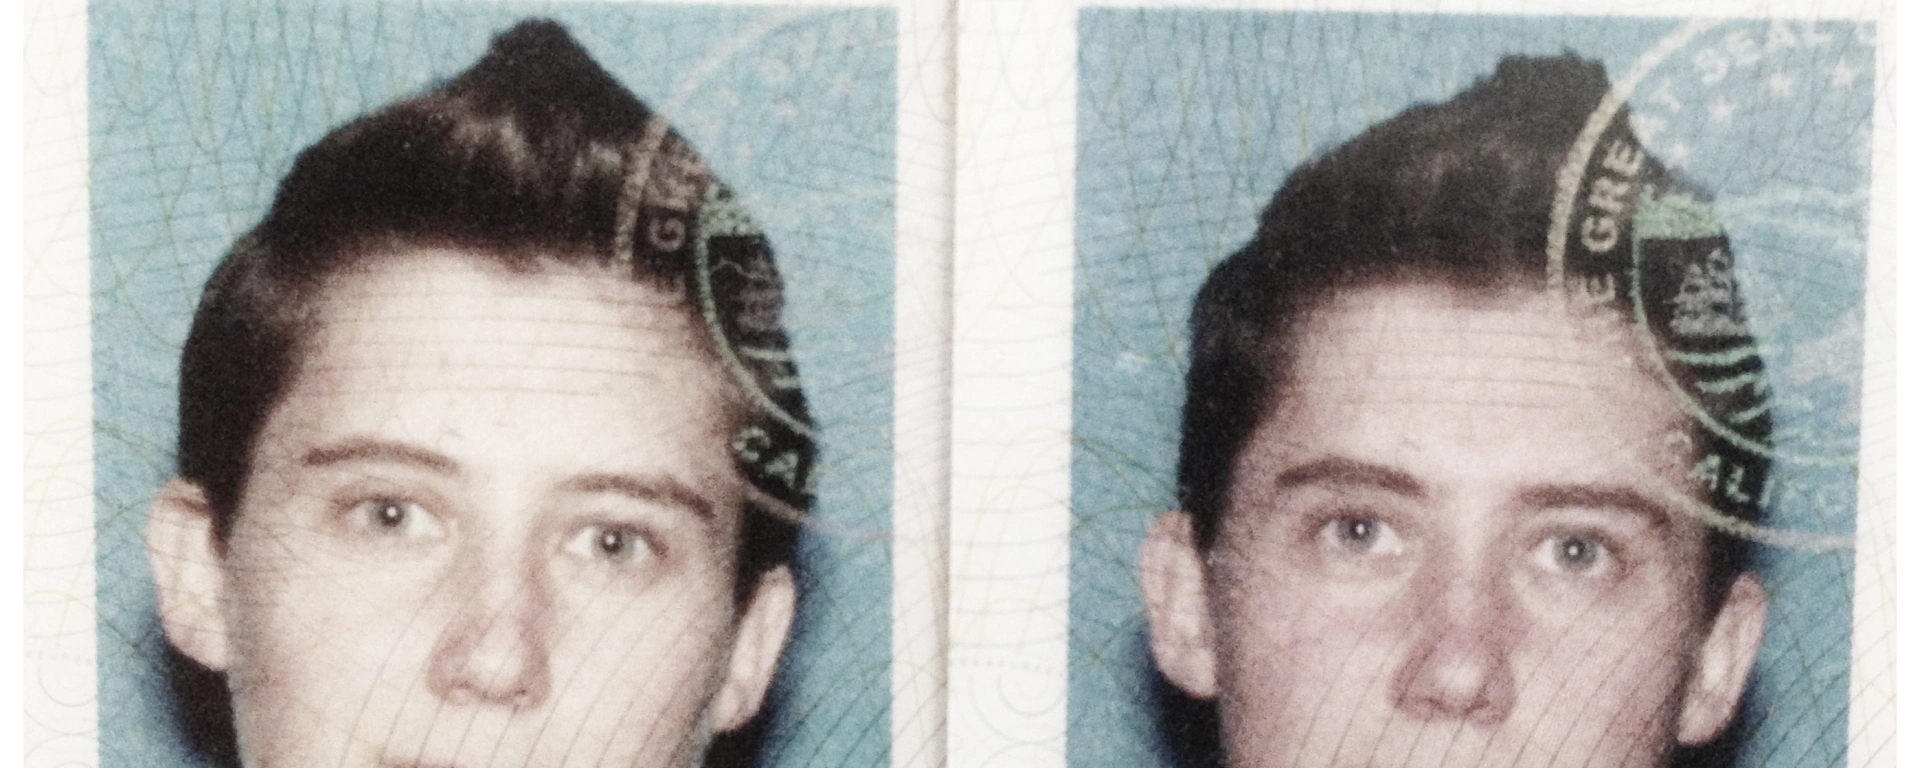 Before & After sex change on CA Driver's license